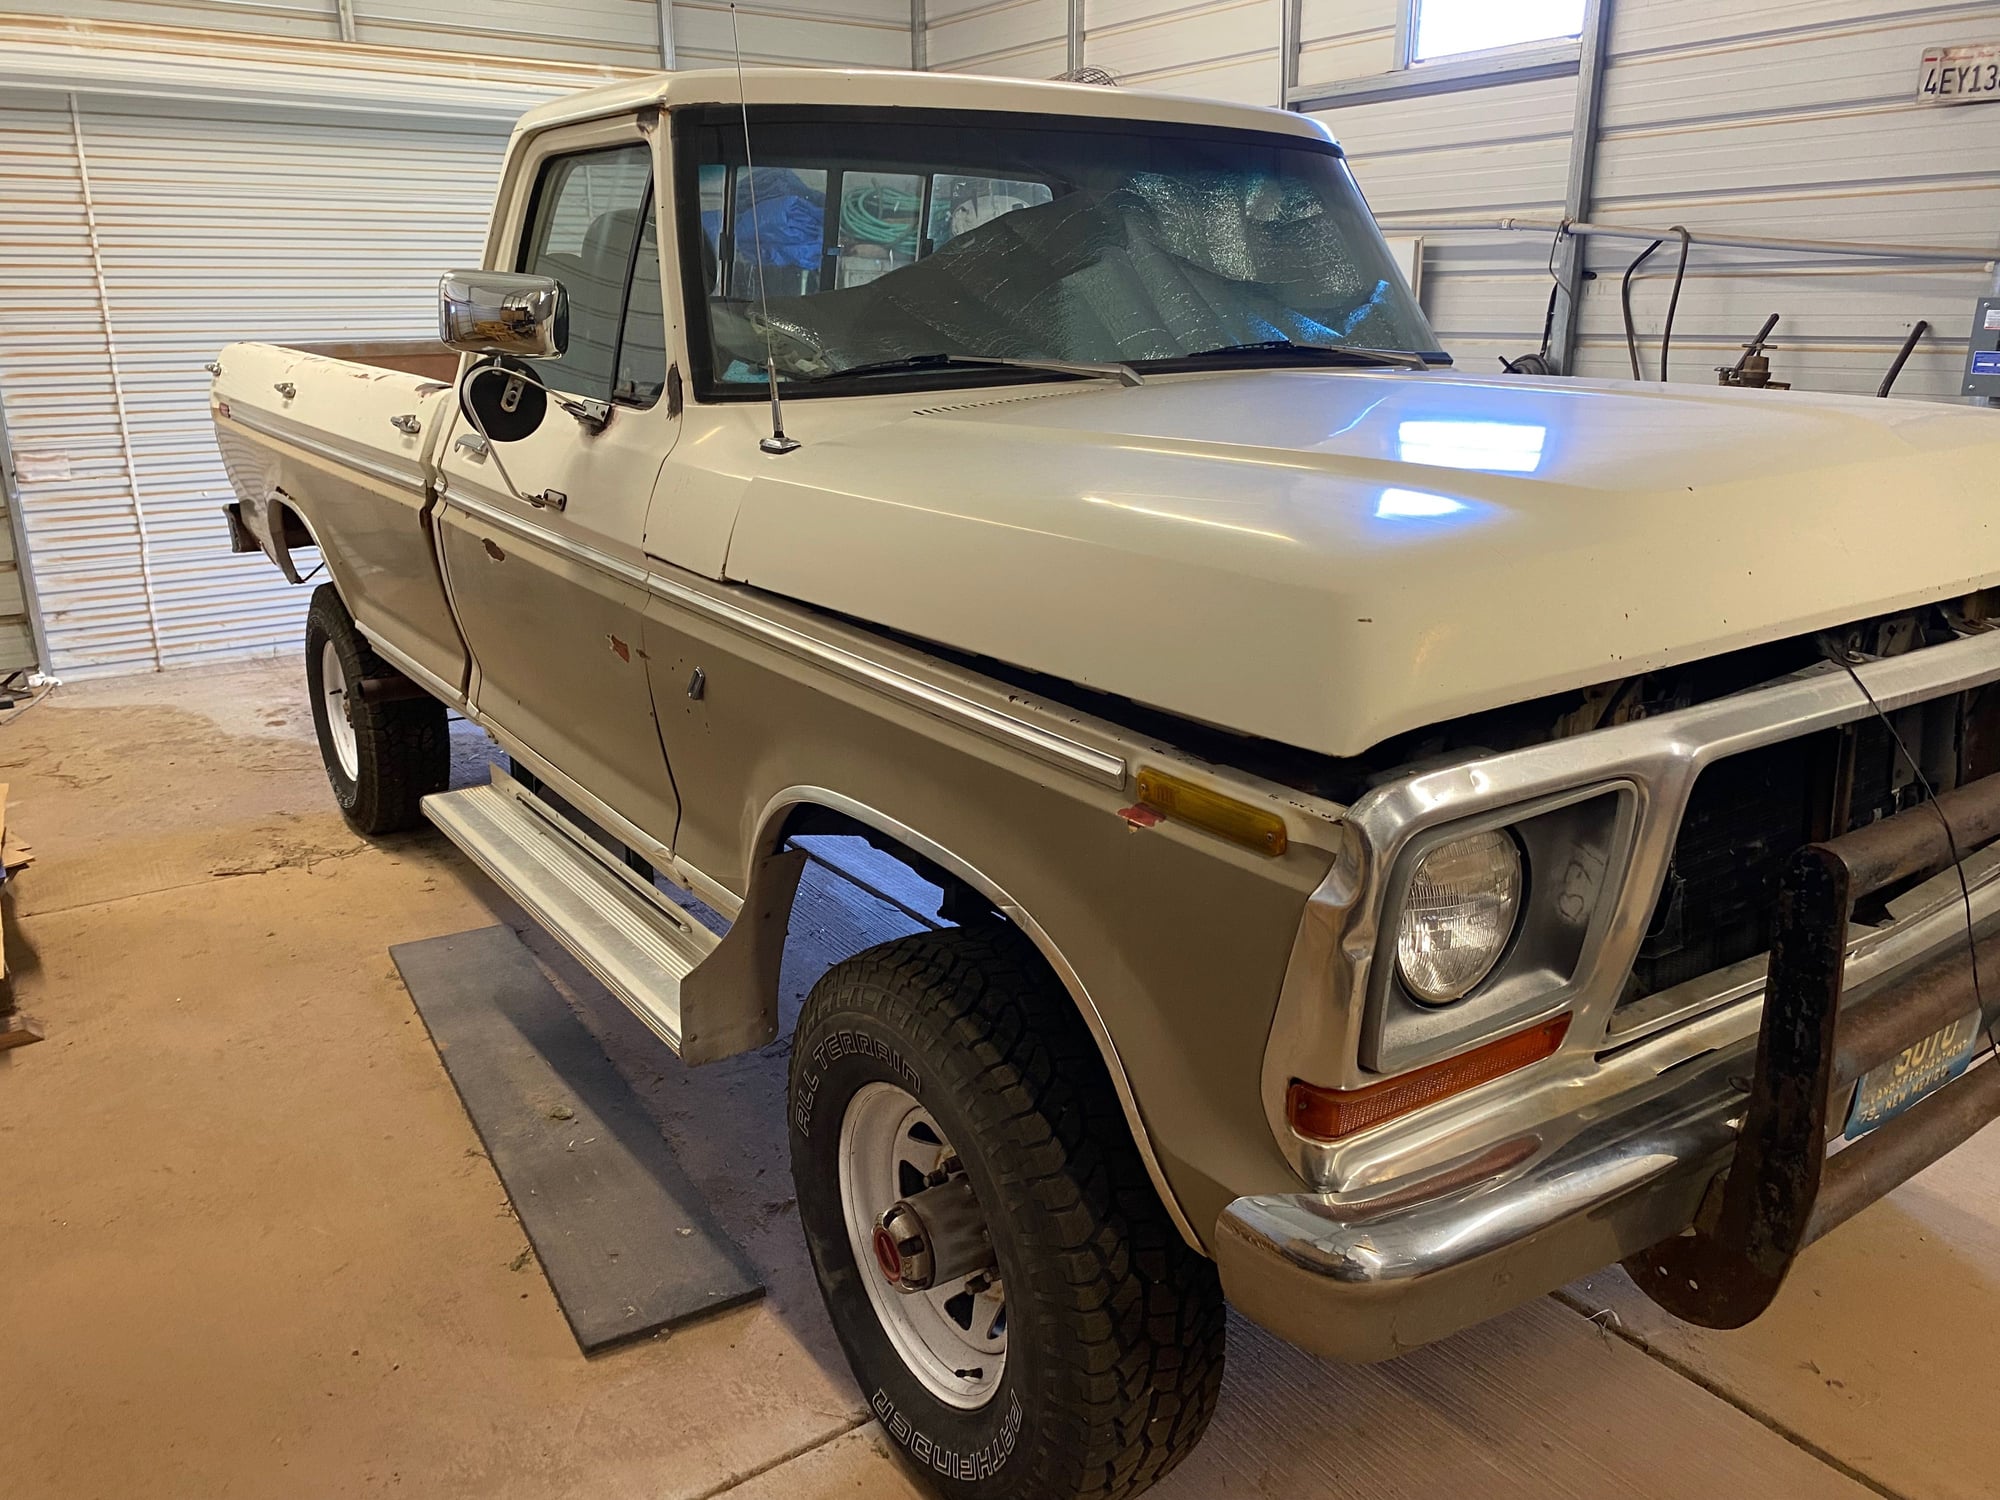 1976 Ford F-250 - 1976 hiboy 4x4 with granny 4speed - Used - Edgewood, NM 87015, United States